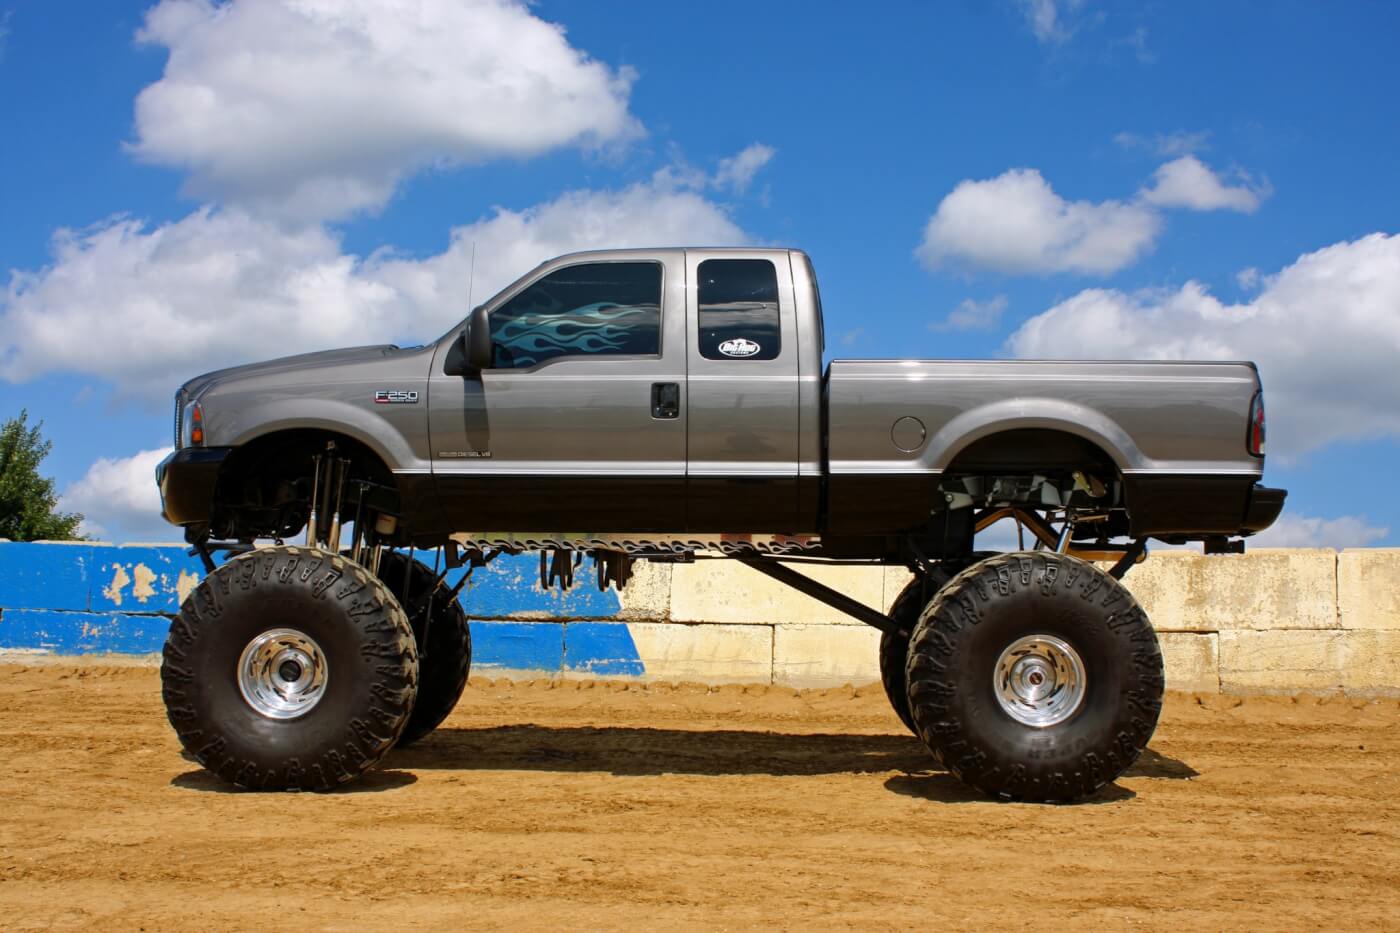 Pigg’s truck is ultra-clean and has a great stance with the huge lift and massive wheels and tires stuffed under the body.